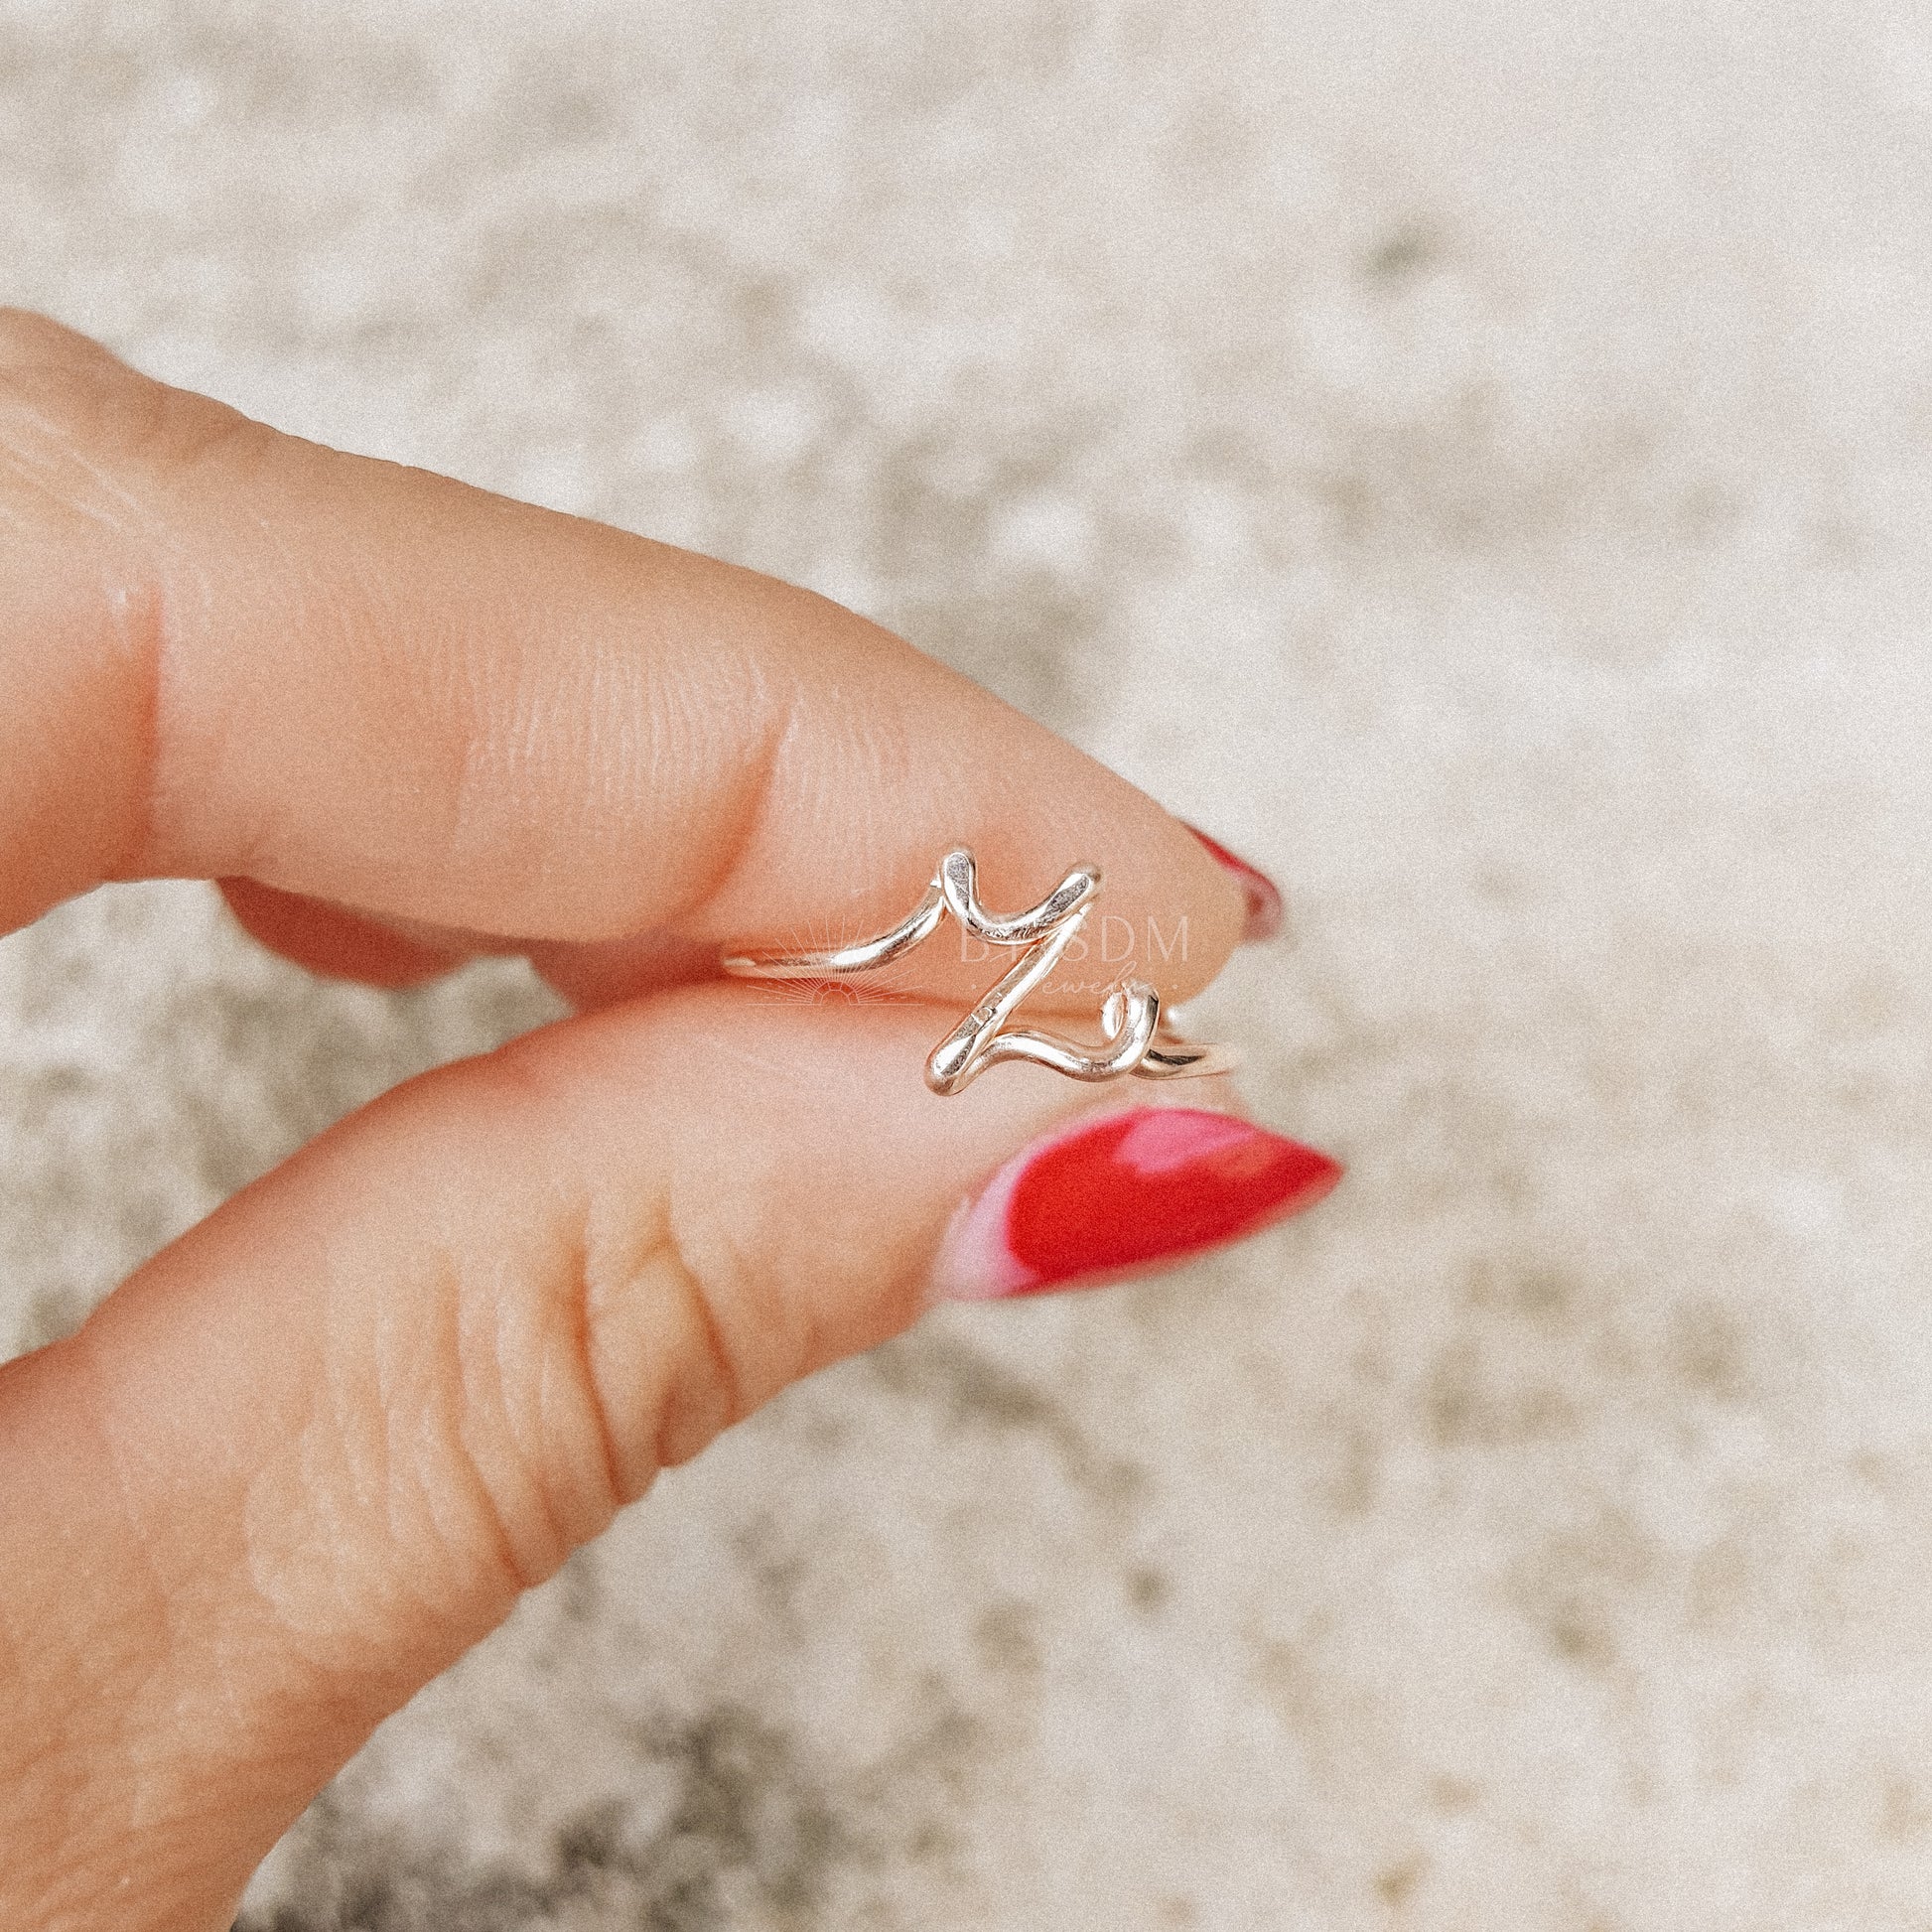 Initial Letter Z Ring • Personalized Wire Initial Ring • Wire Ring • Personalized Ring • Adjustable Ring • Wire Letters • BYSDMJEWELS